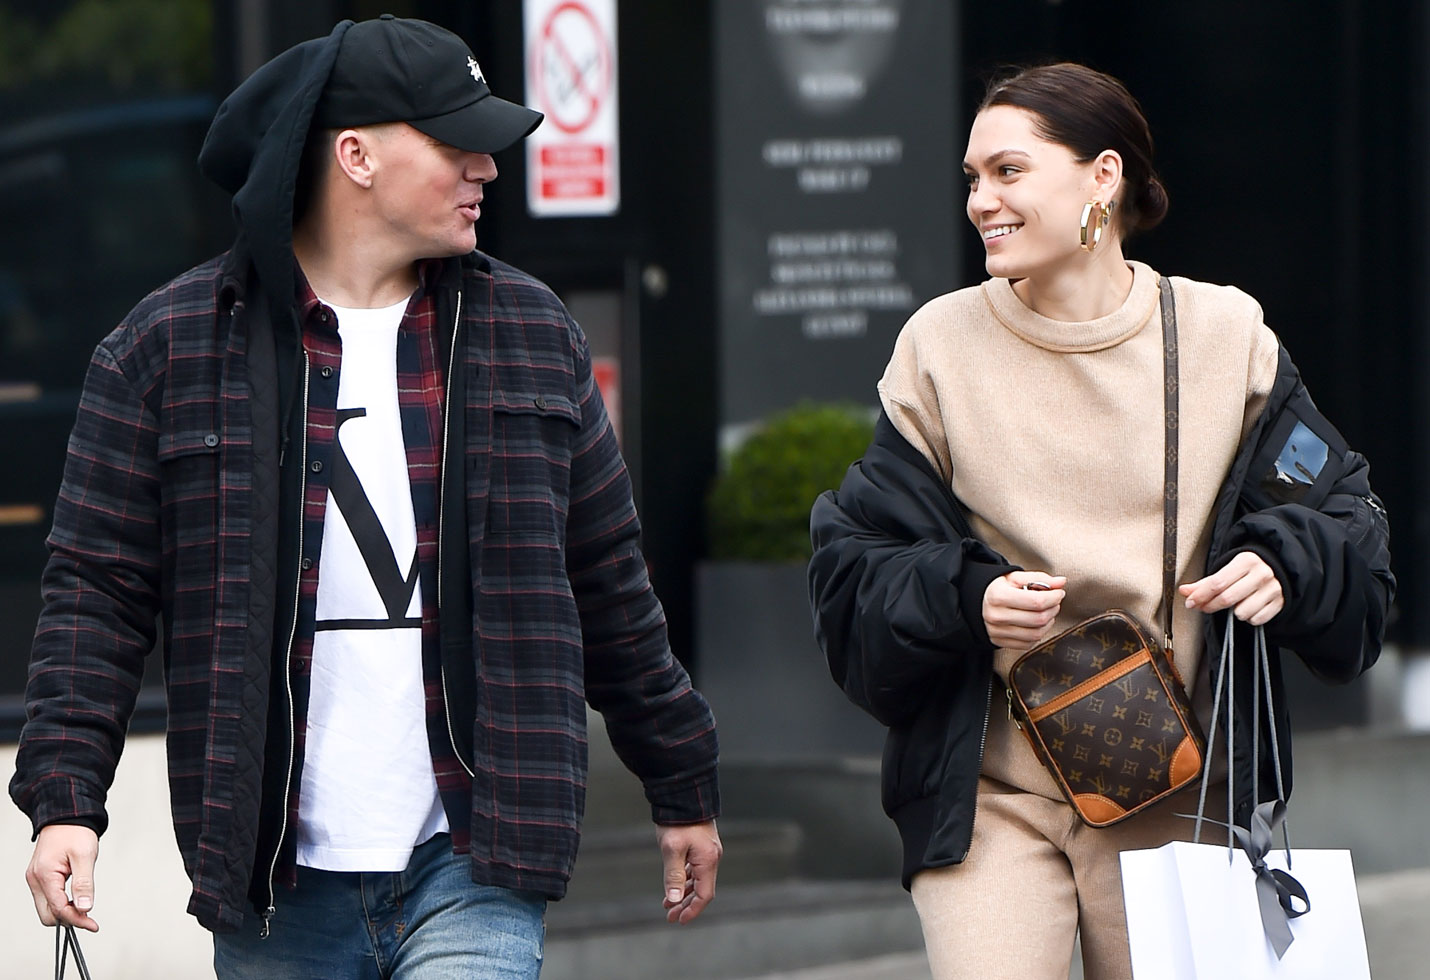 Channing Tatum & Jessie J Split After Over A Year Together1430 x 980